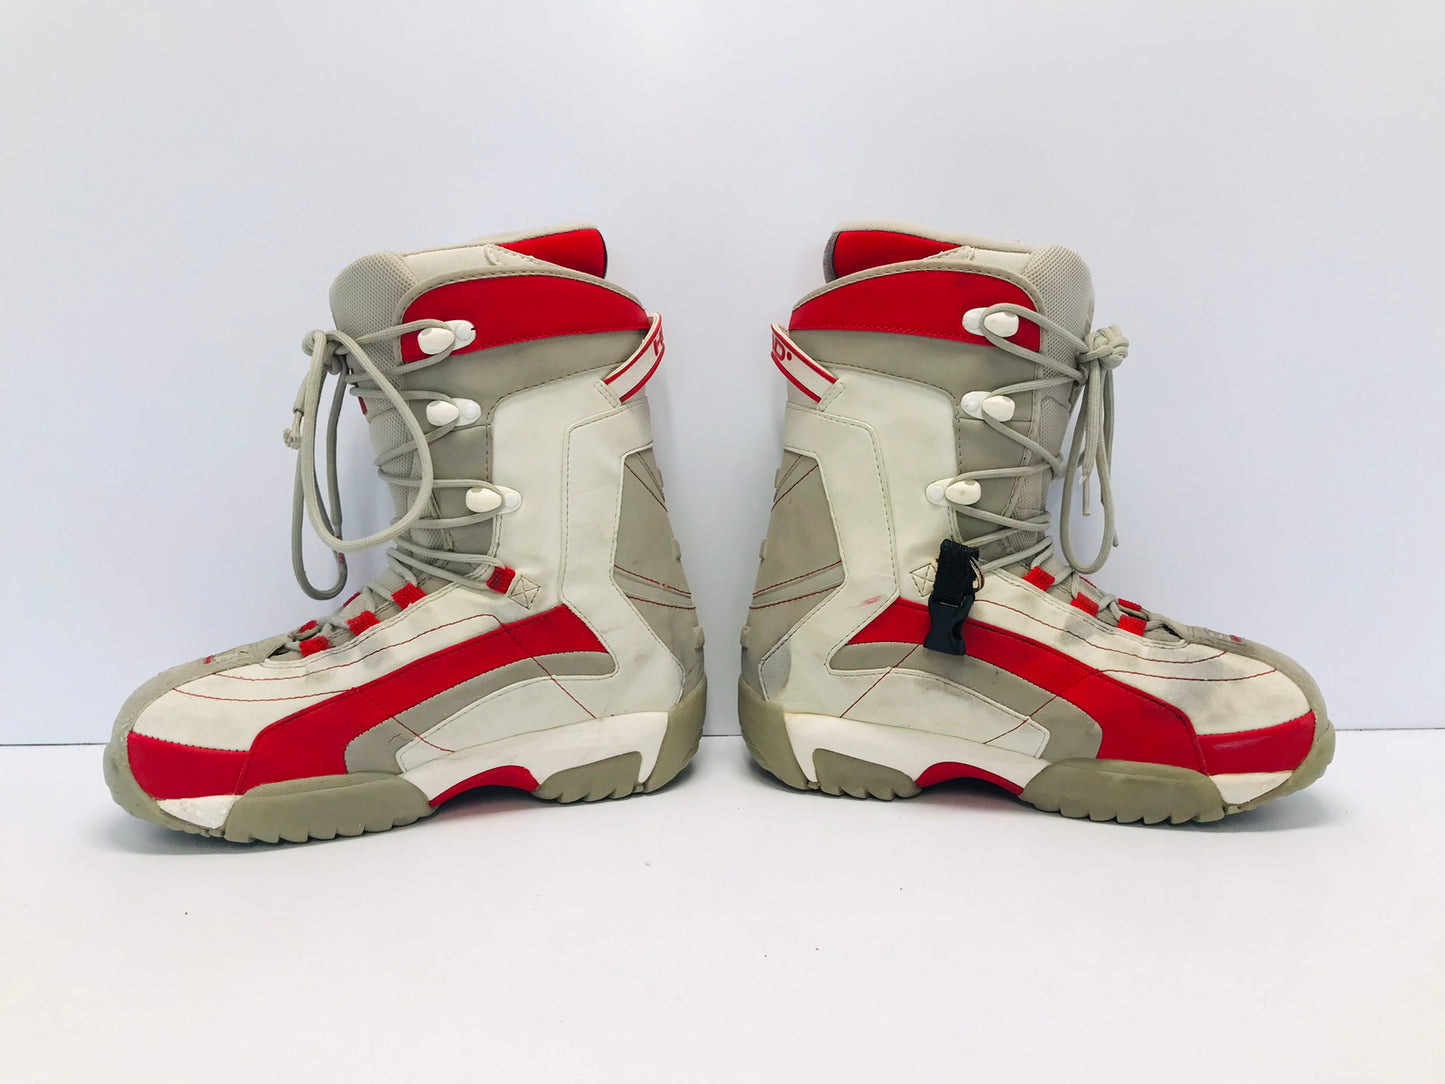 Snowboarding Boots Men's Size 8.5 Head White Grey Red Minor Marks